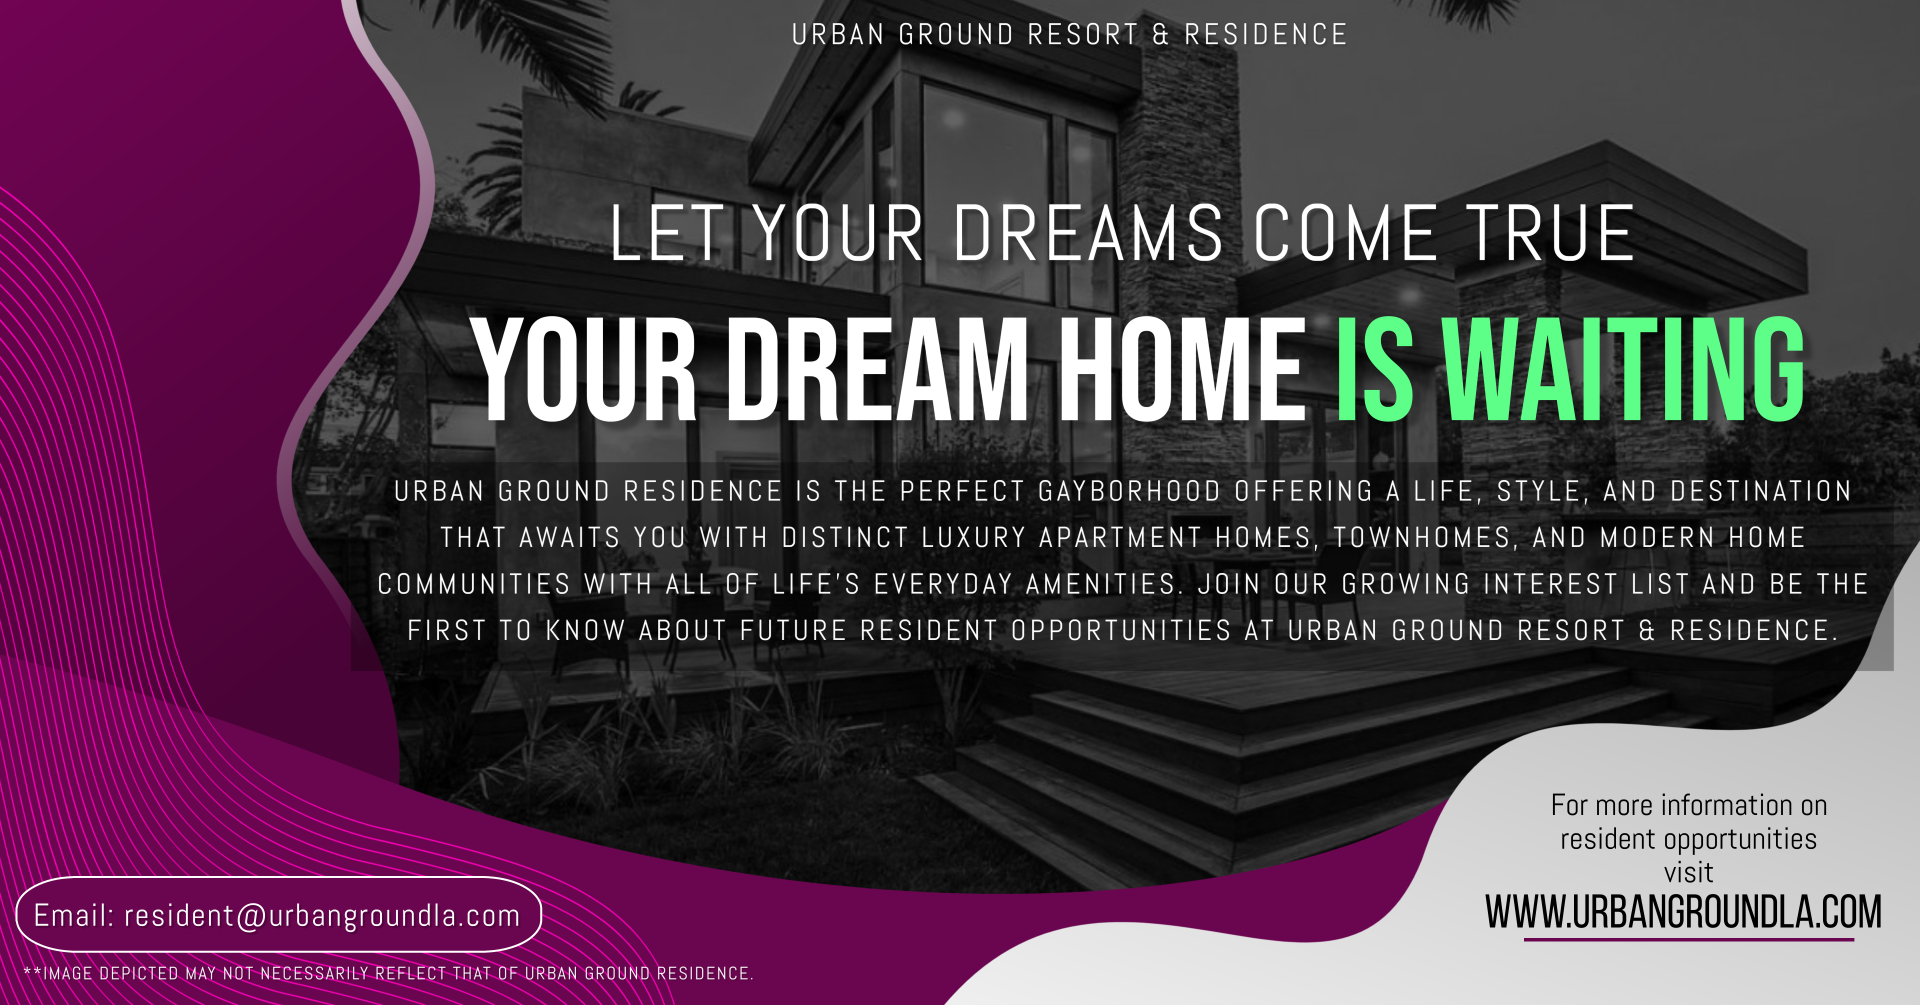 Urban Ground Residence Let Your Dreams Come True